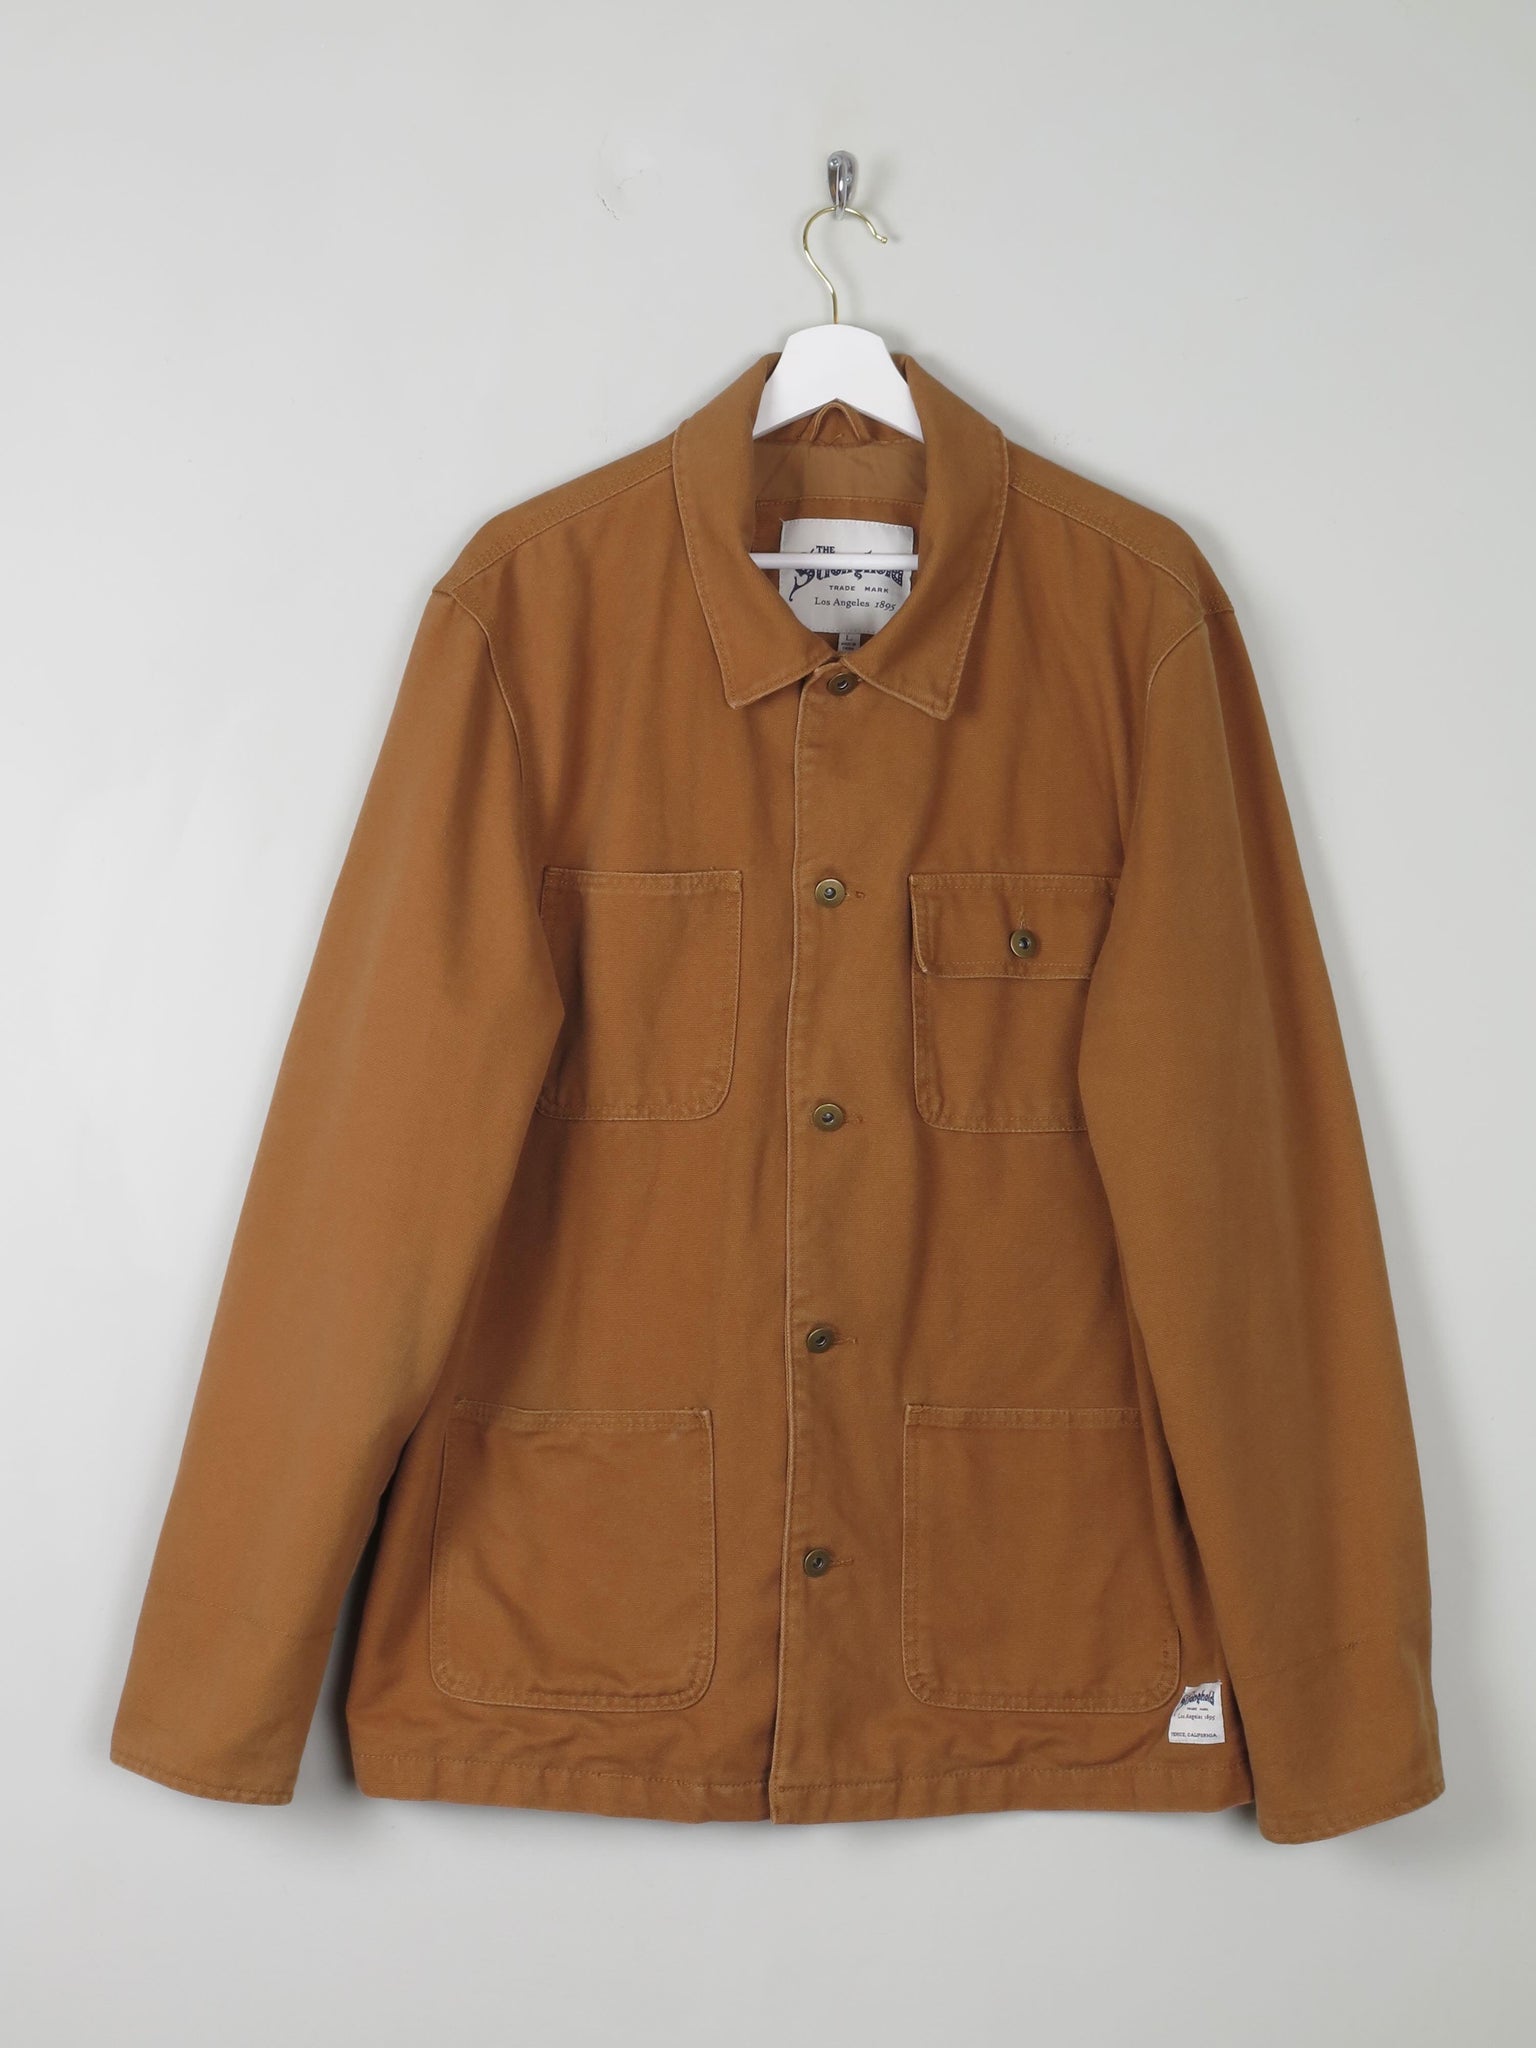 Men's Chore Jacket By The Stronghold Rust/Orange L - The Harlequin